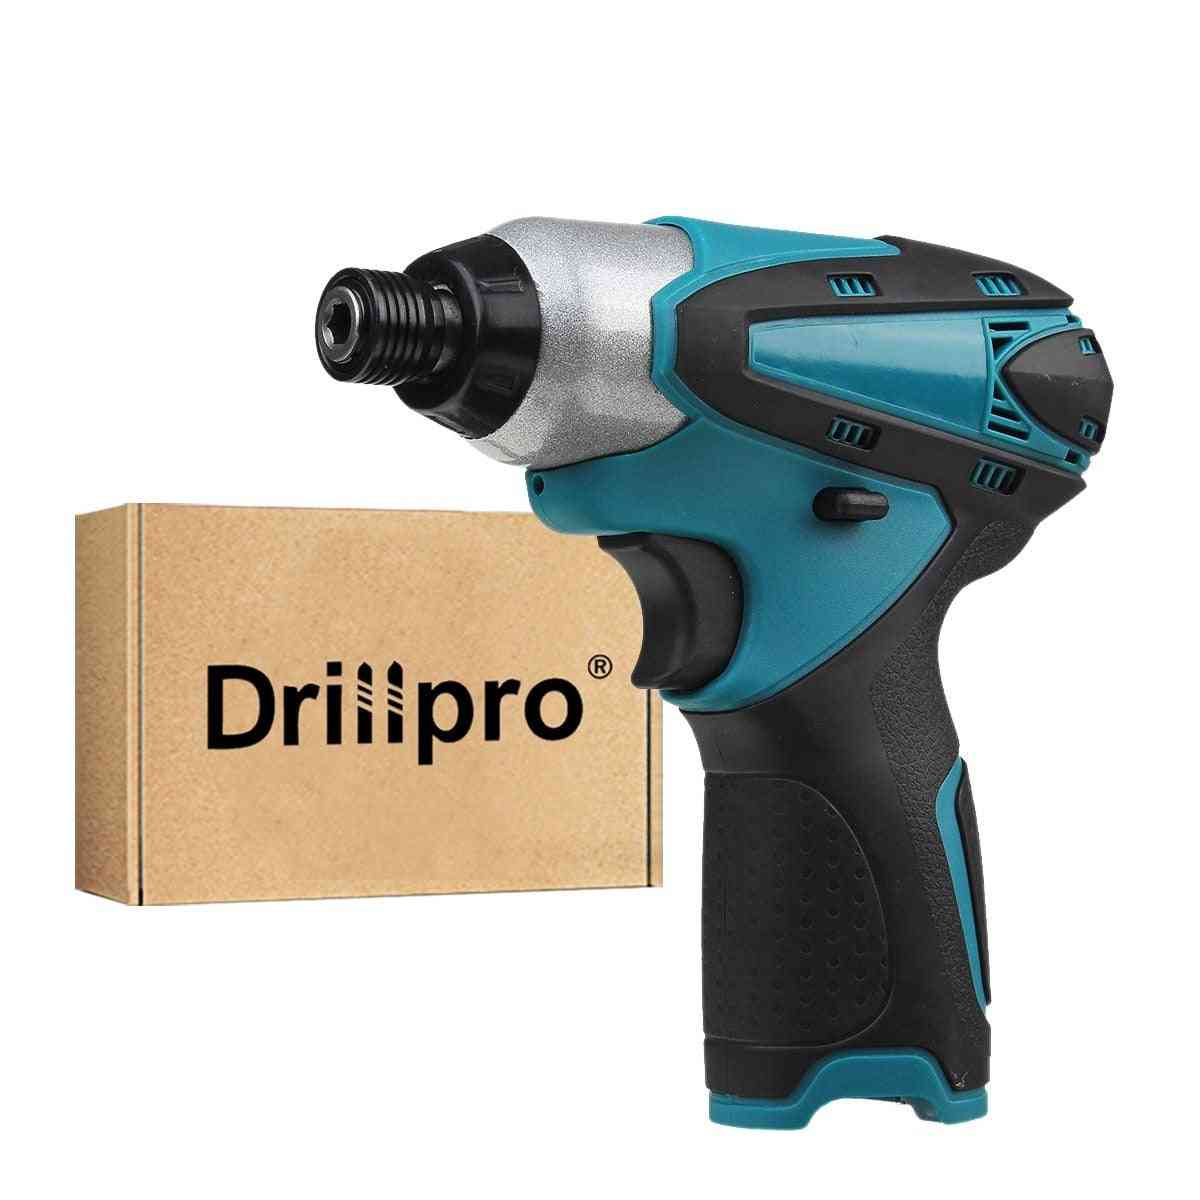 Rechargeable Household Cordless Electric Drill